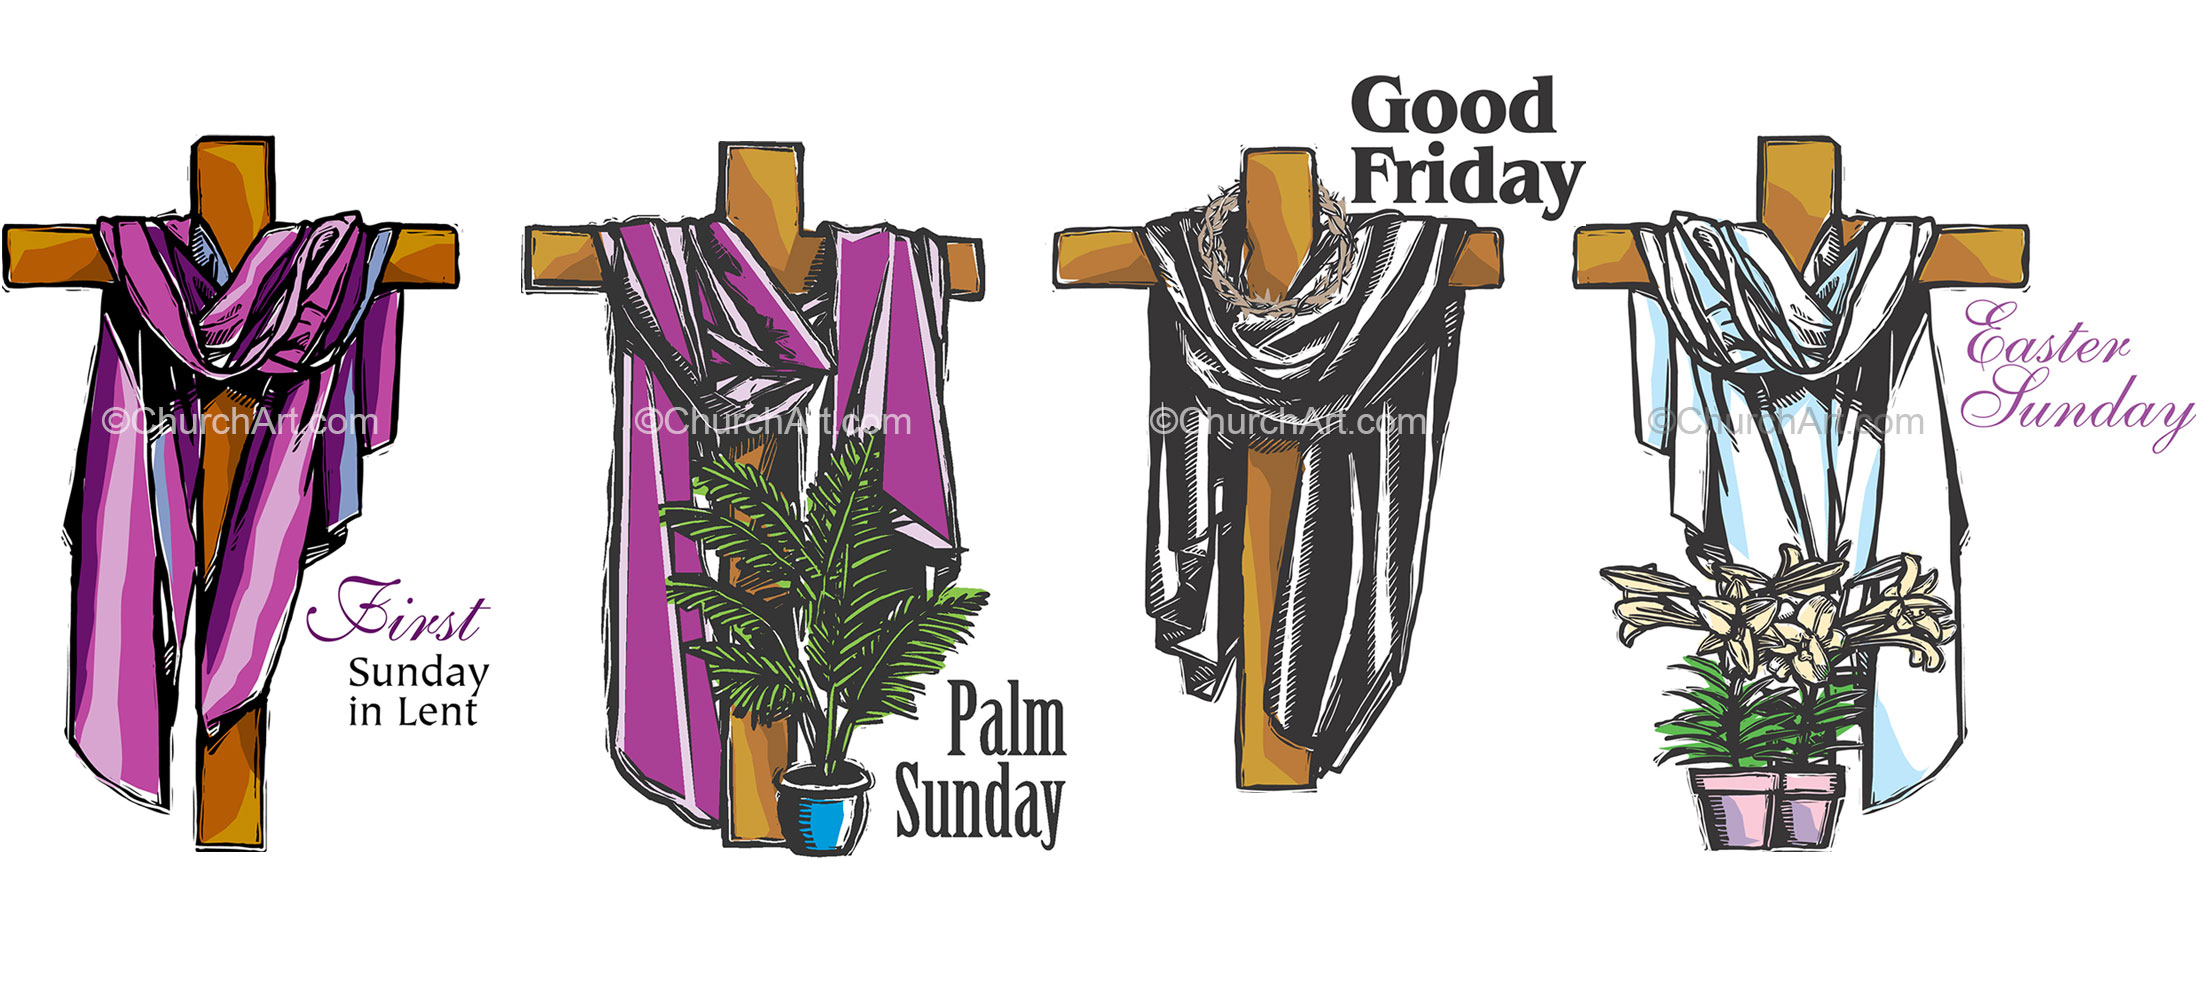 In preparation of the season of lent, images of crosses from first Sunday to Easter Sunday